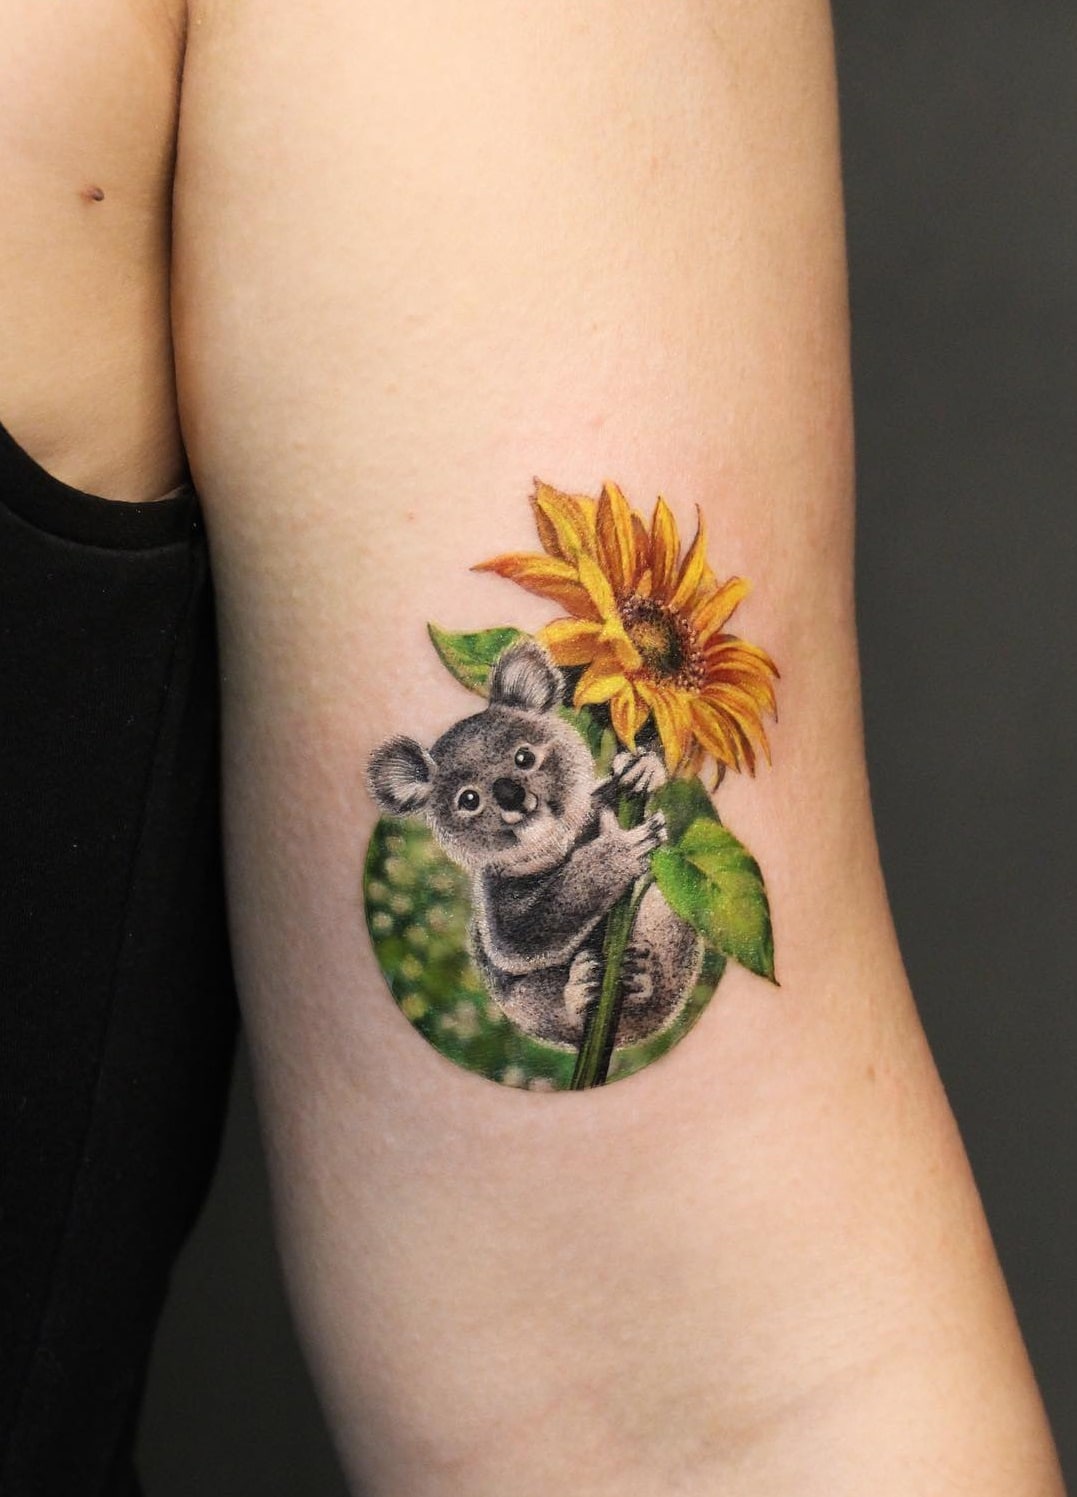 110 Animal Tattoo Designs with Meanings | Art and Design